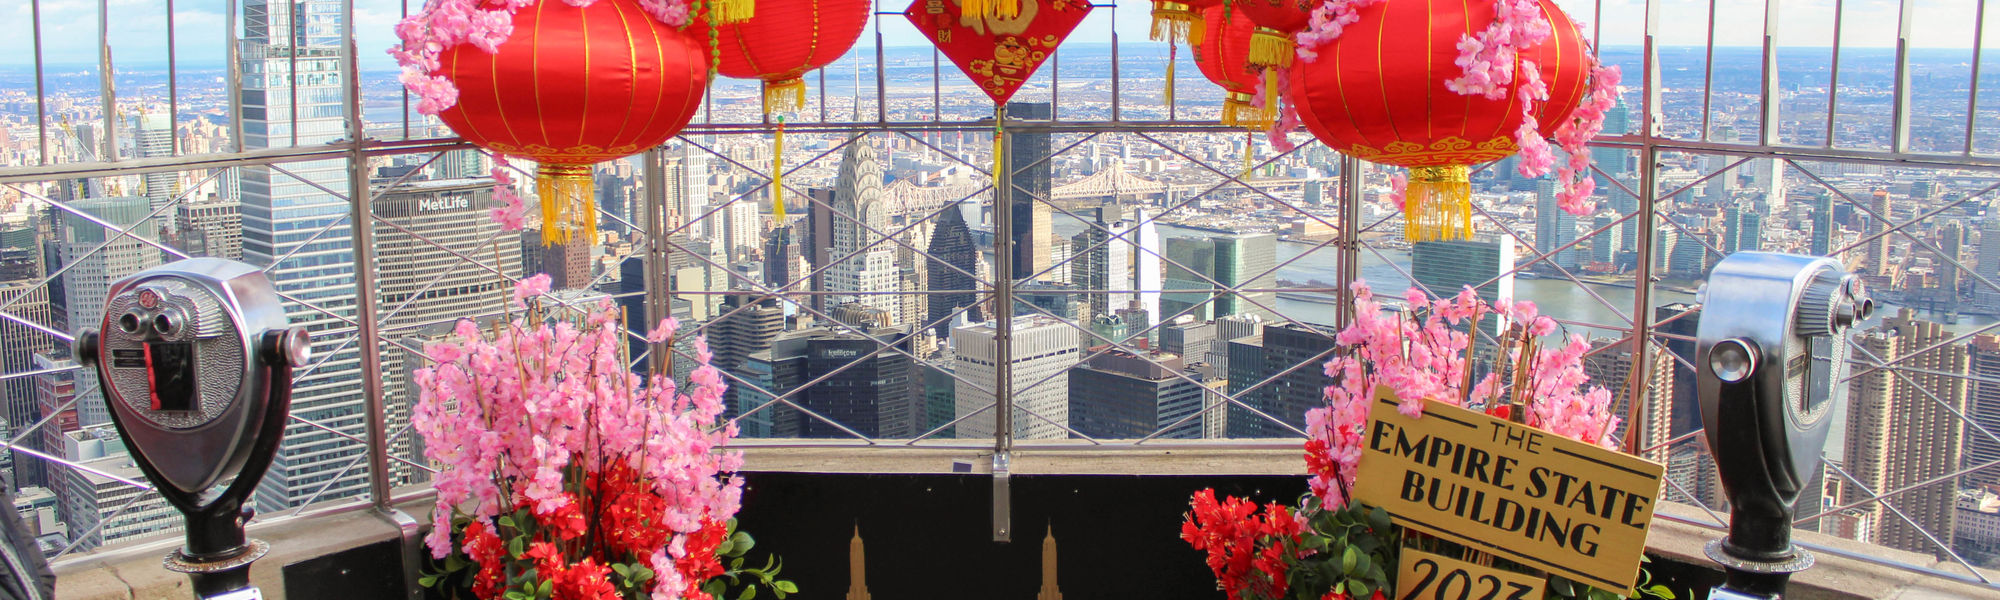 Lunar New Year Photo Opportunity at ESB